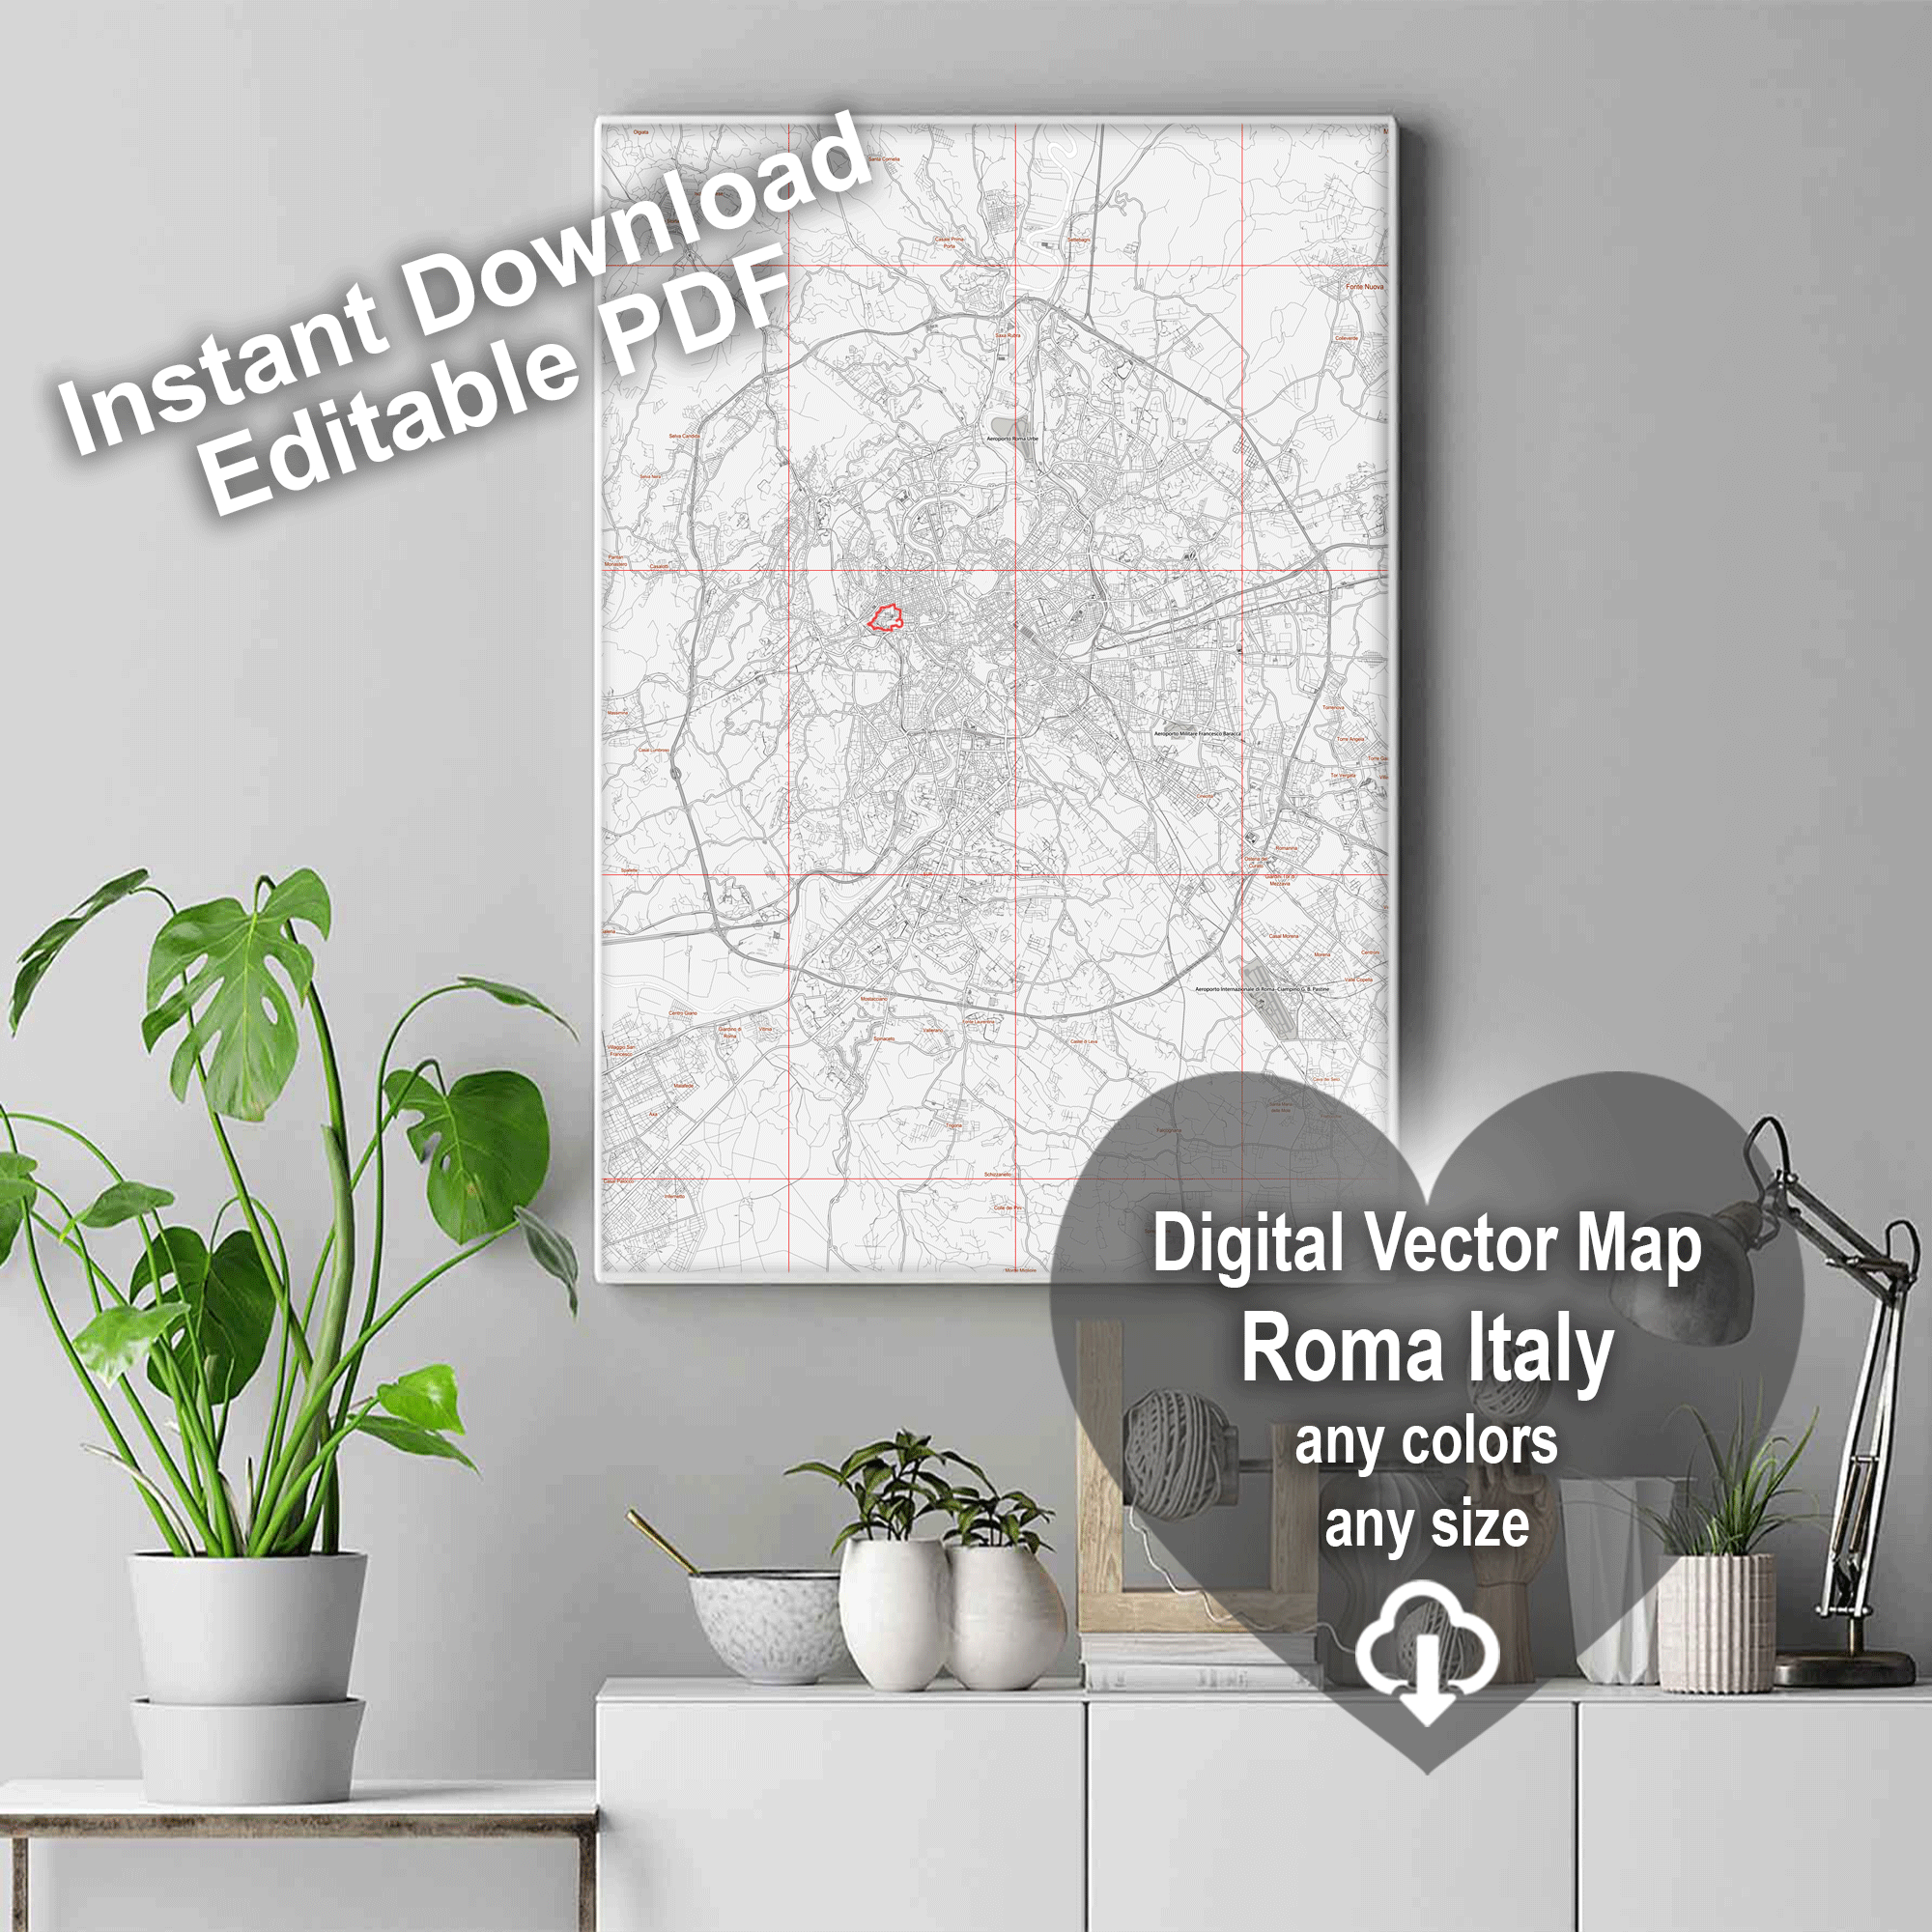 Roma Italy PDF Vector Map: City Plan Low Detailed (simple white) Street Map editable Adobe PDF in layers